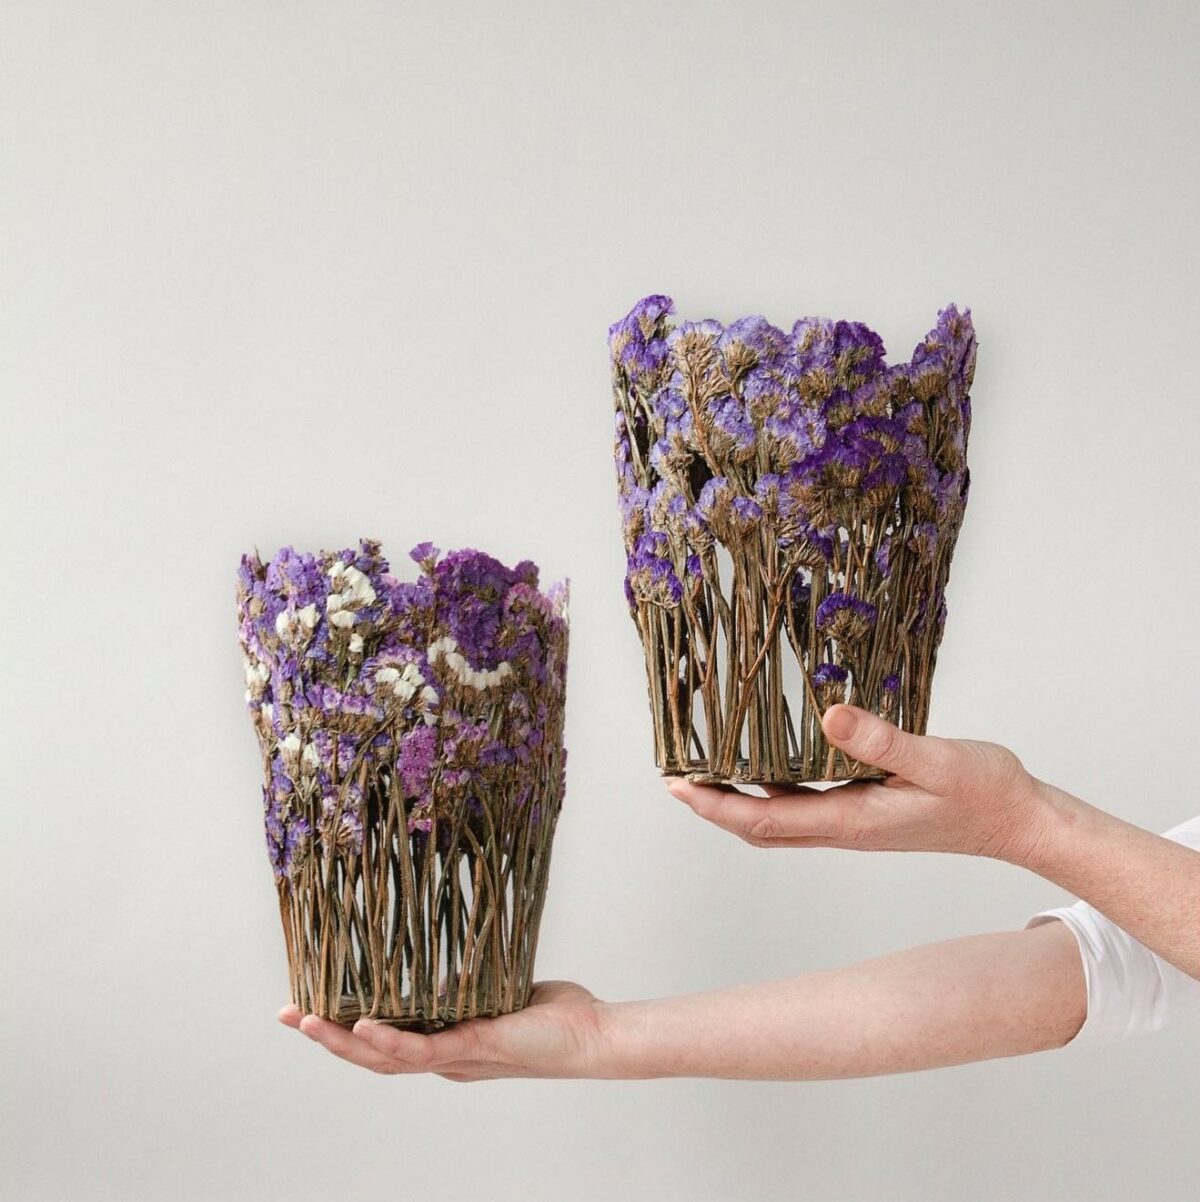 Bouquet Delicate Sculptural Vessels Made Of Dried And Pressed Flowers By Shannon Clegg (11)